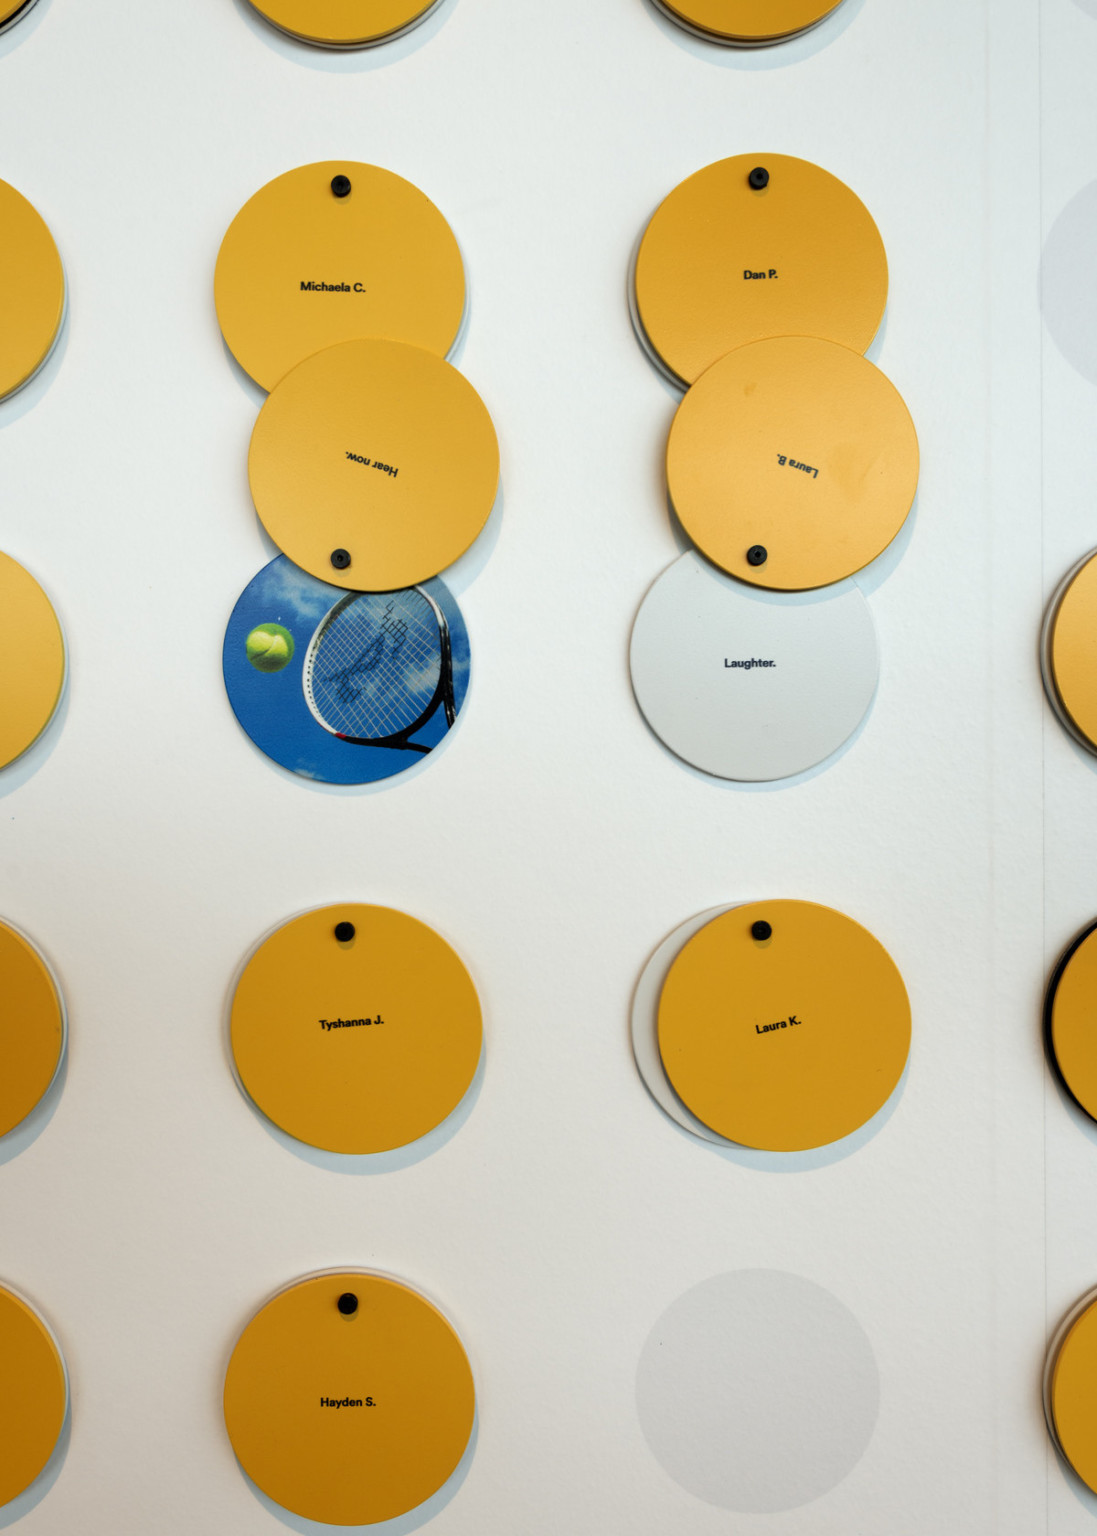 Layered circles hang on white wall with yellow top layer, words and images